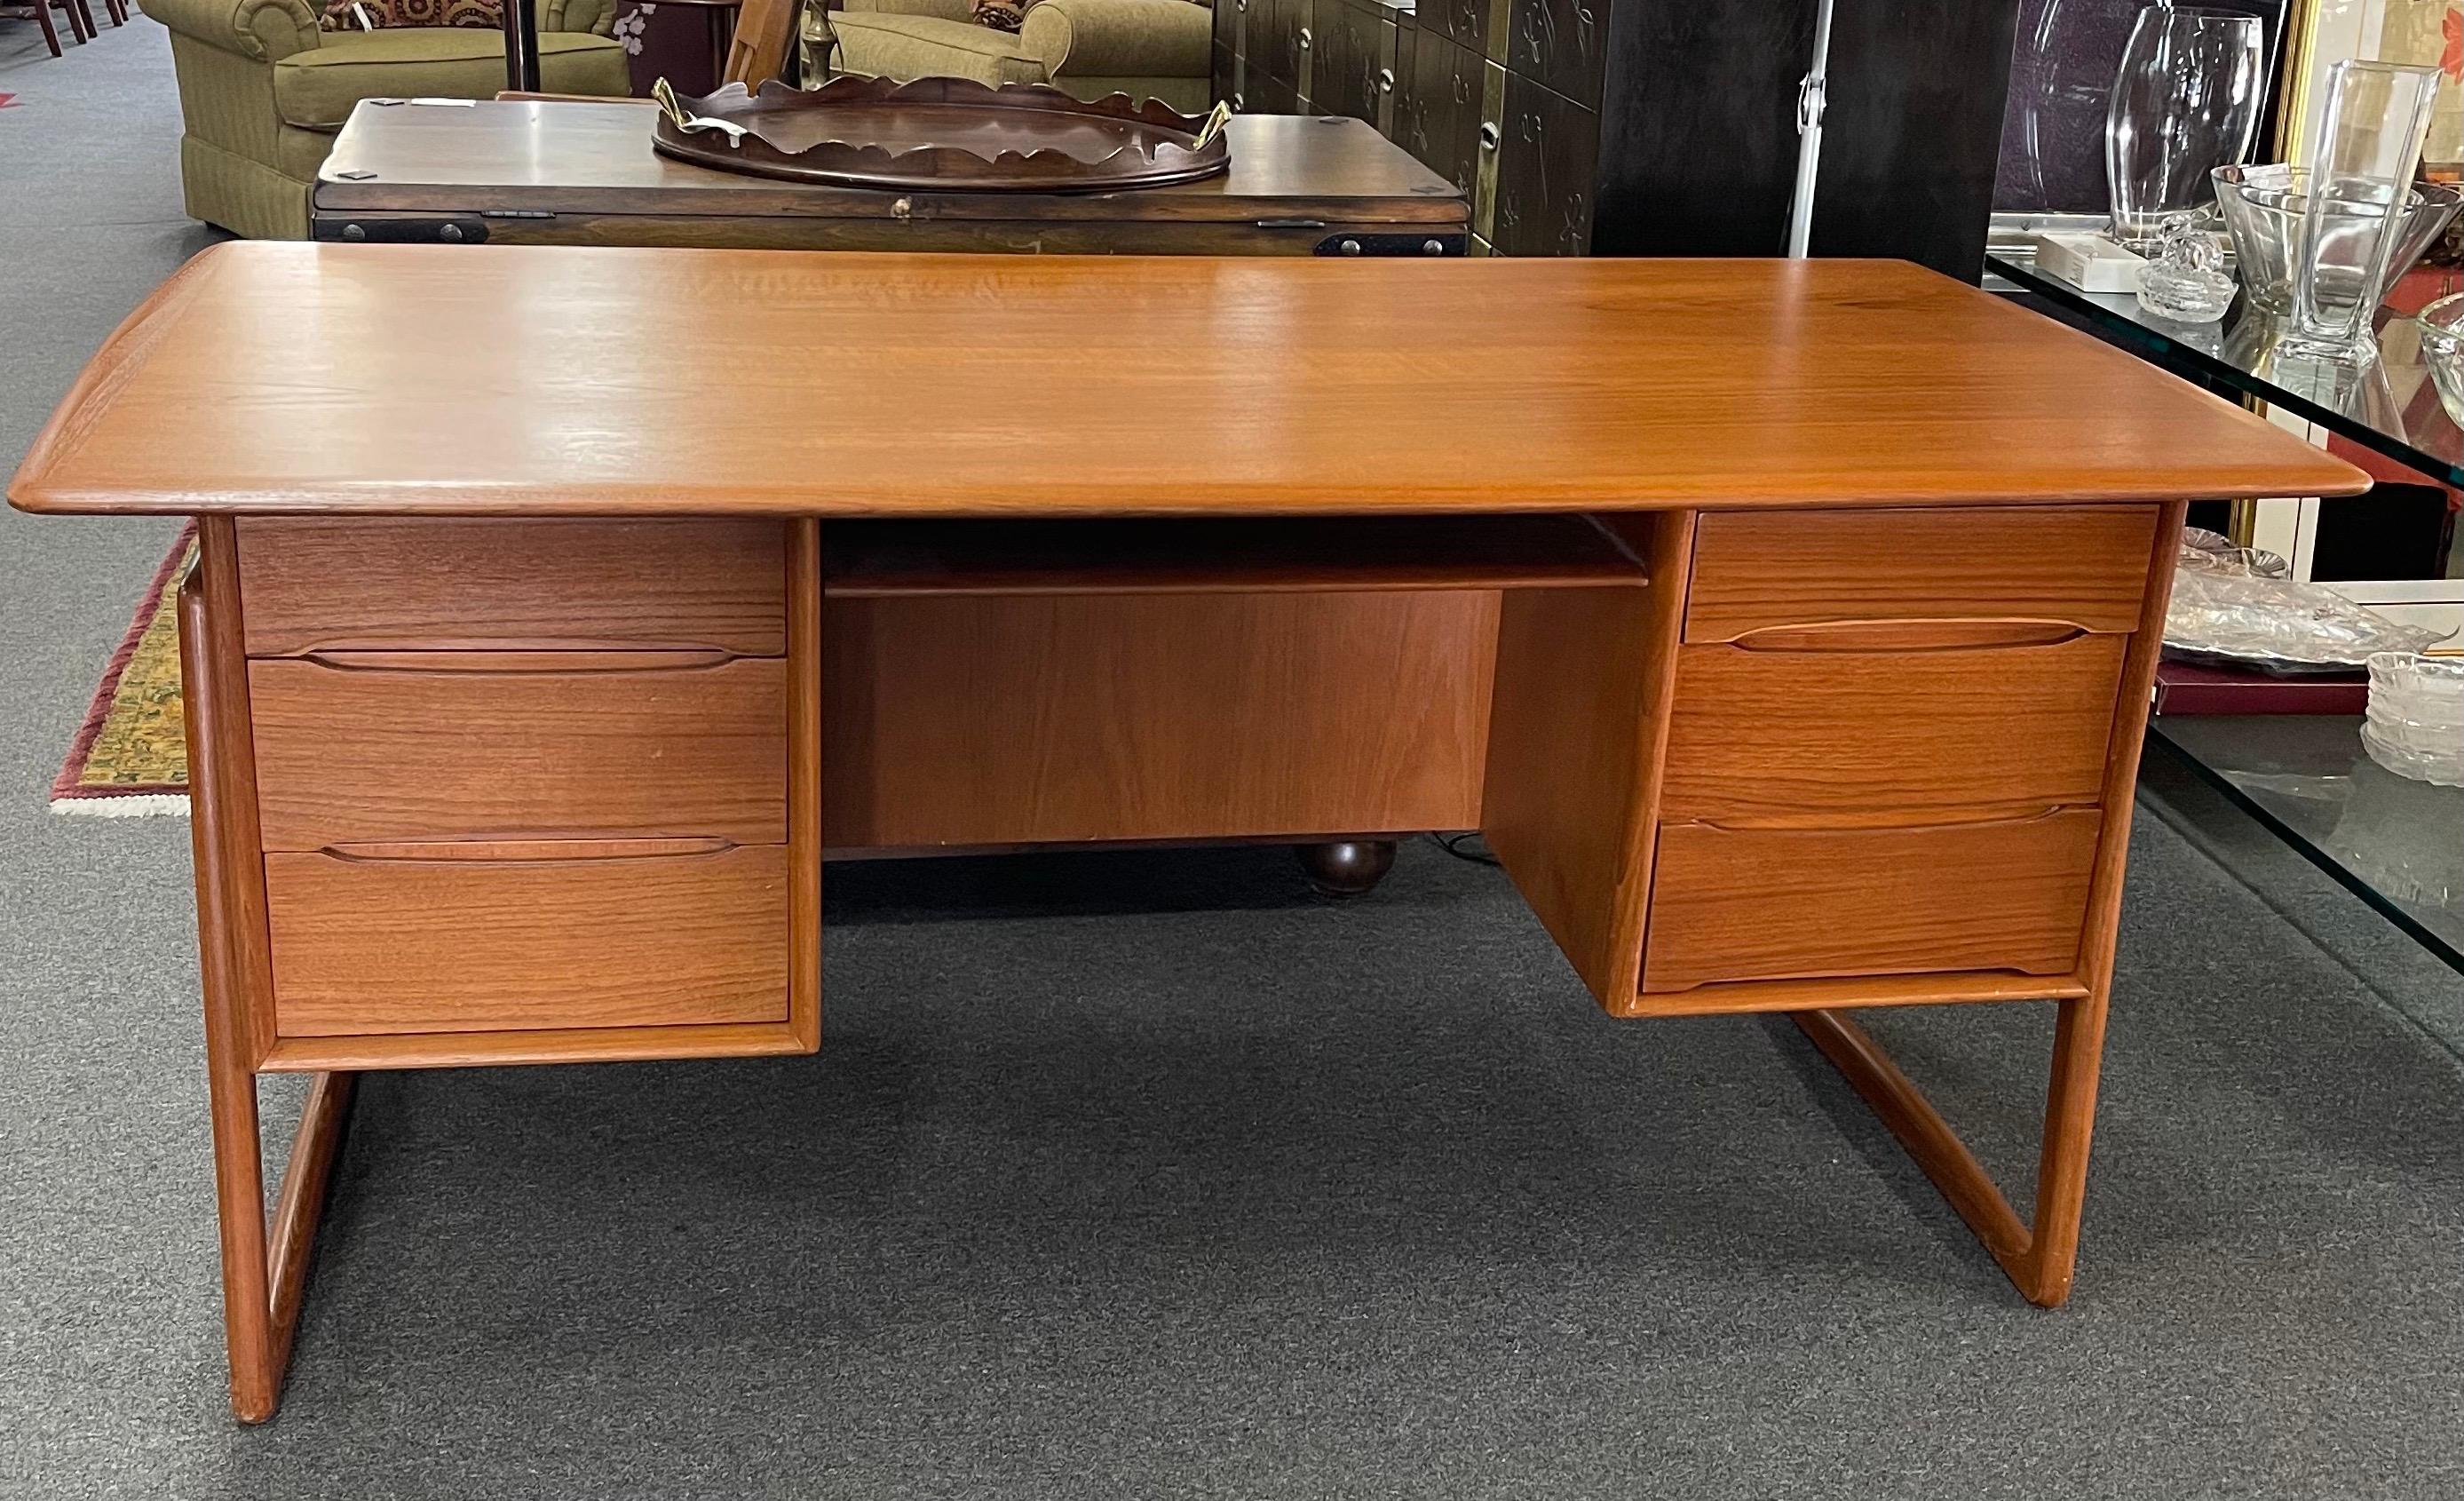 Danish Modern Executive Desk in Teak by Svend Aage Madsen for Sigurd Hansen In Good Condition For Sale In San Diego, CA